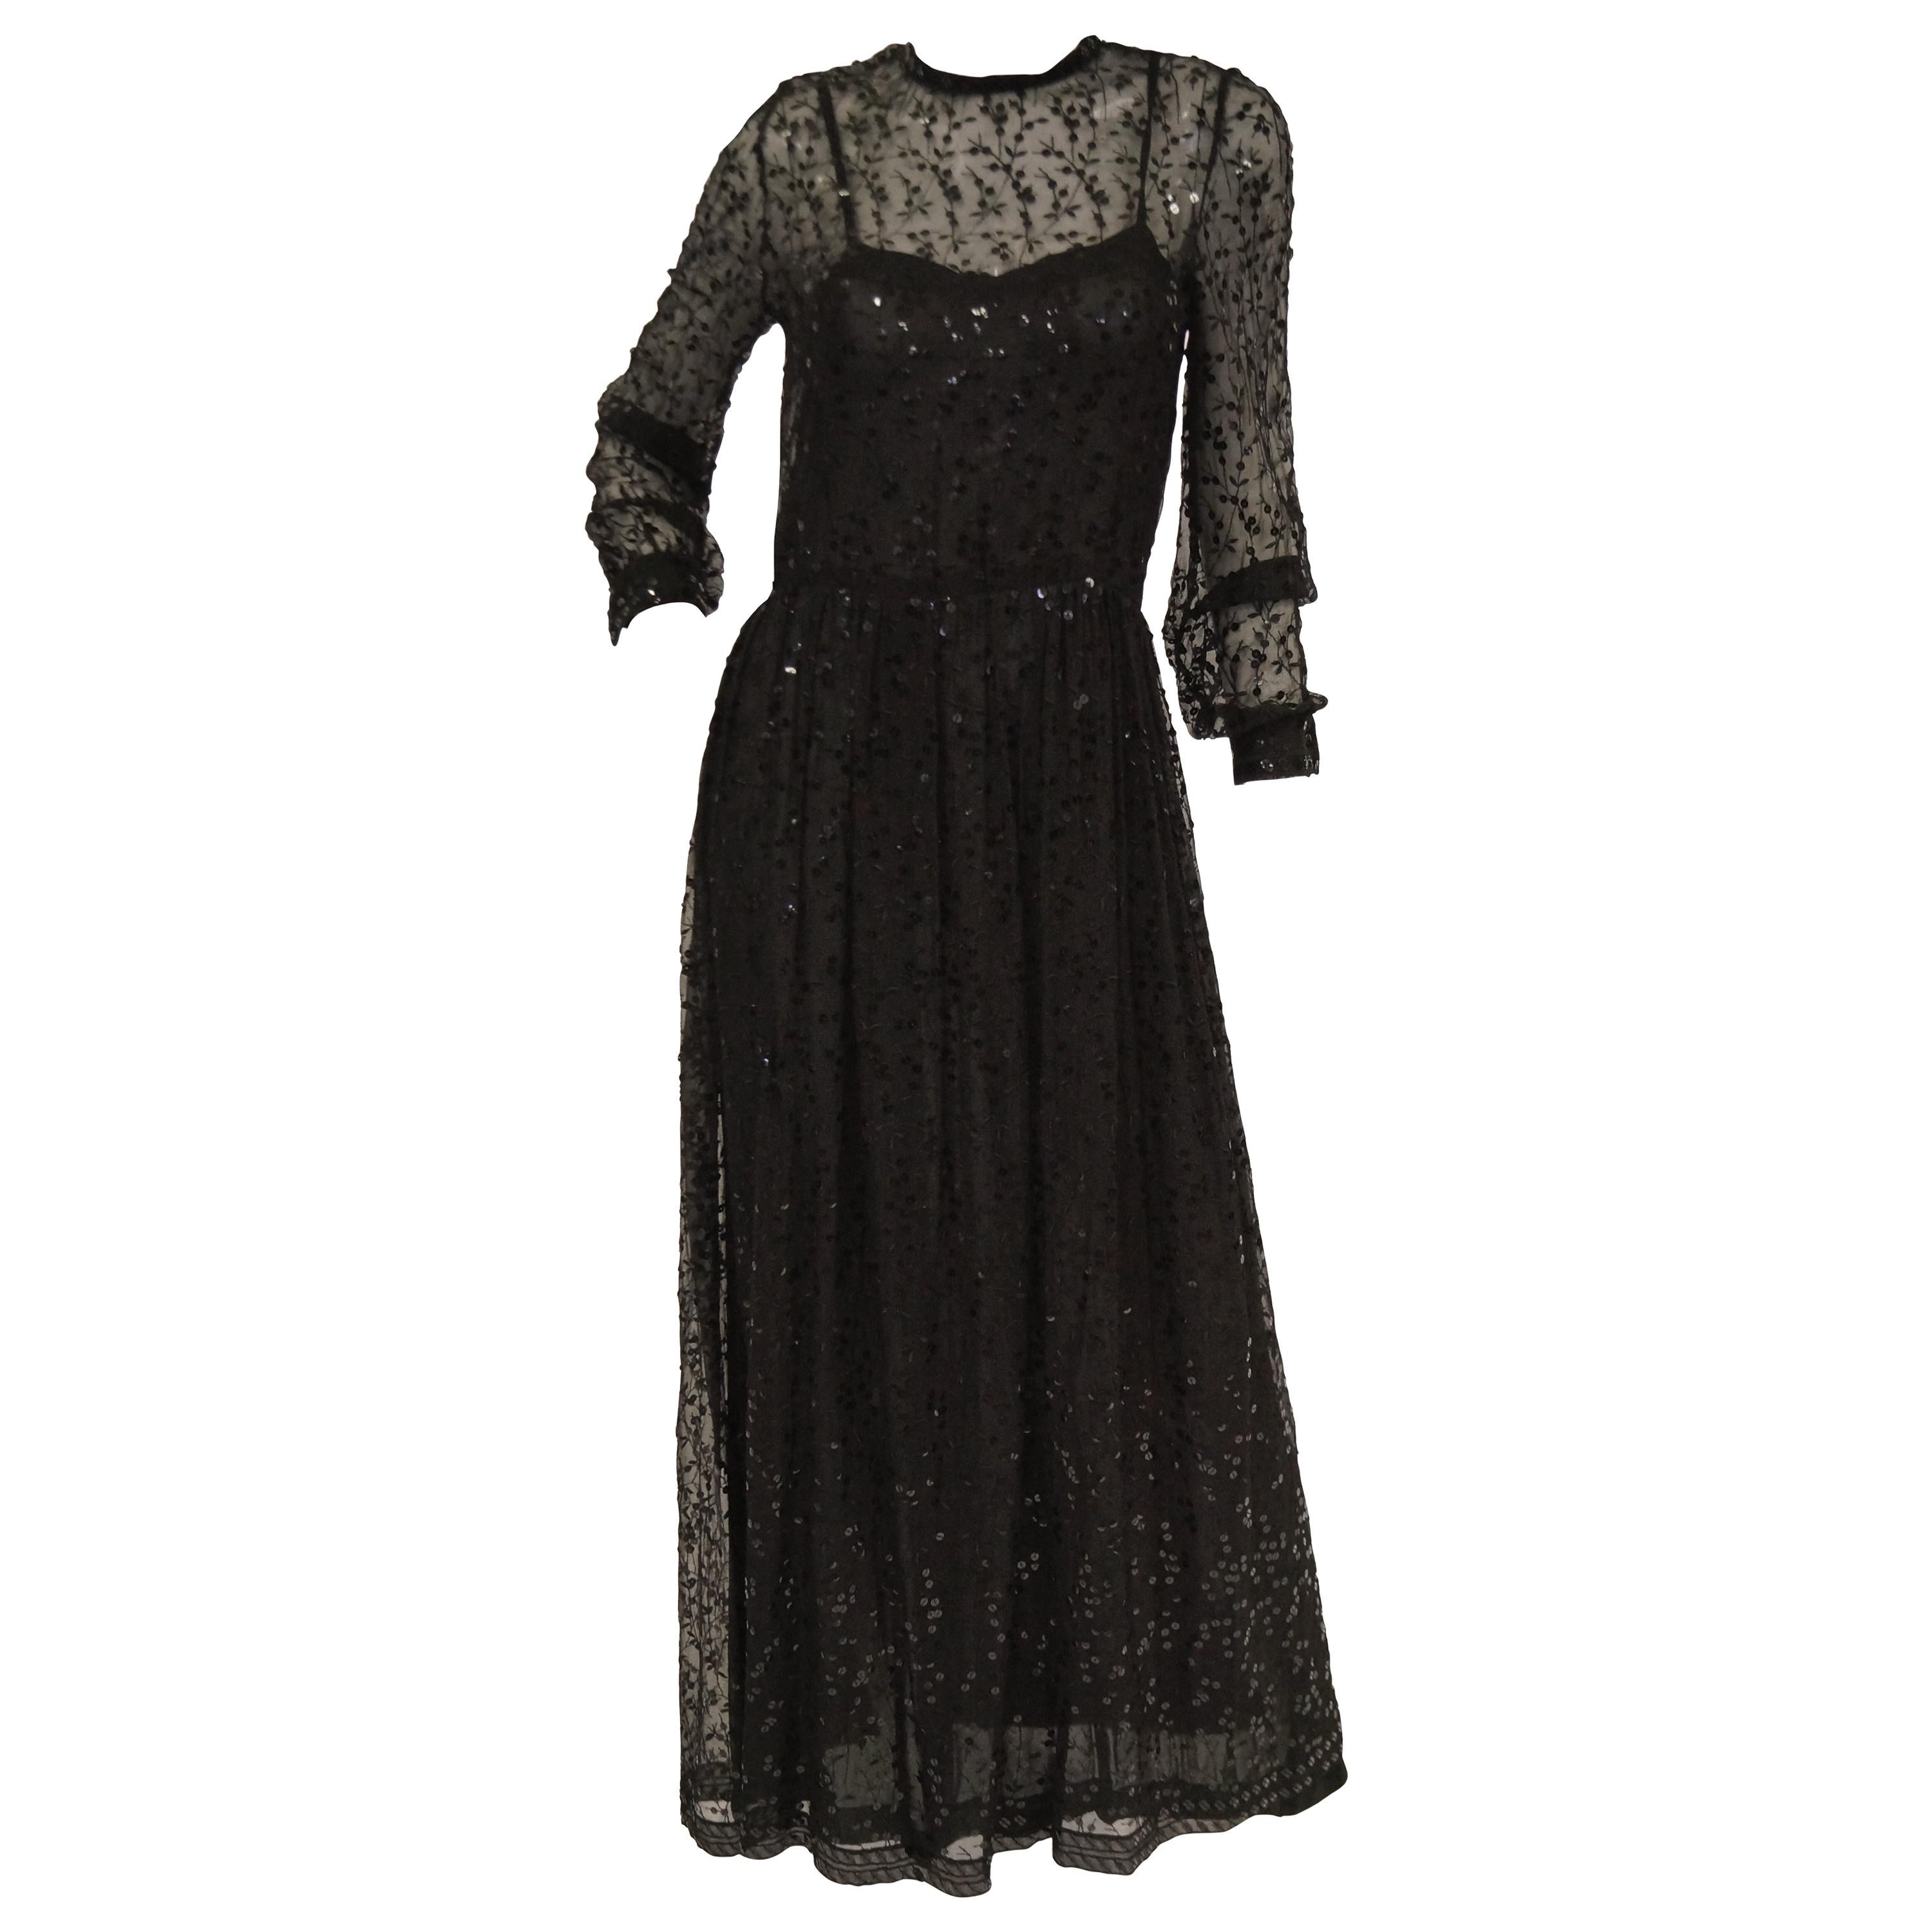 1980s Chanel Sheer Black Silk Evening Dress with Floral Embroidery and Sequins